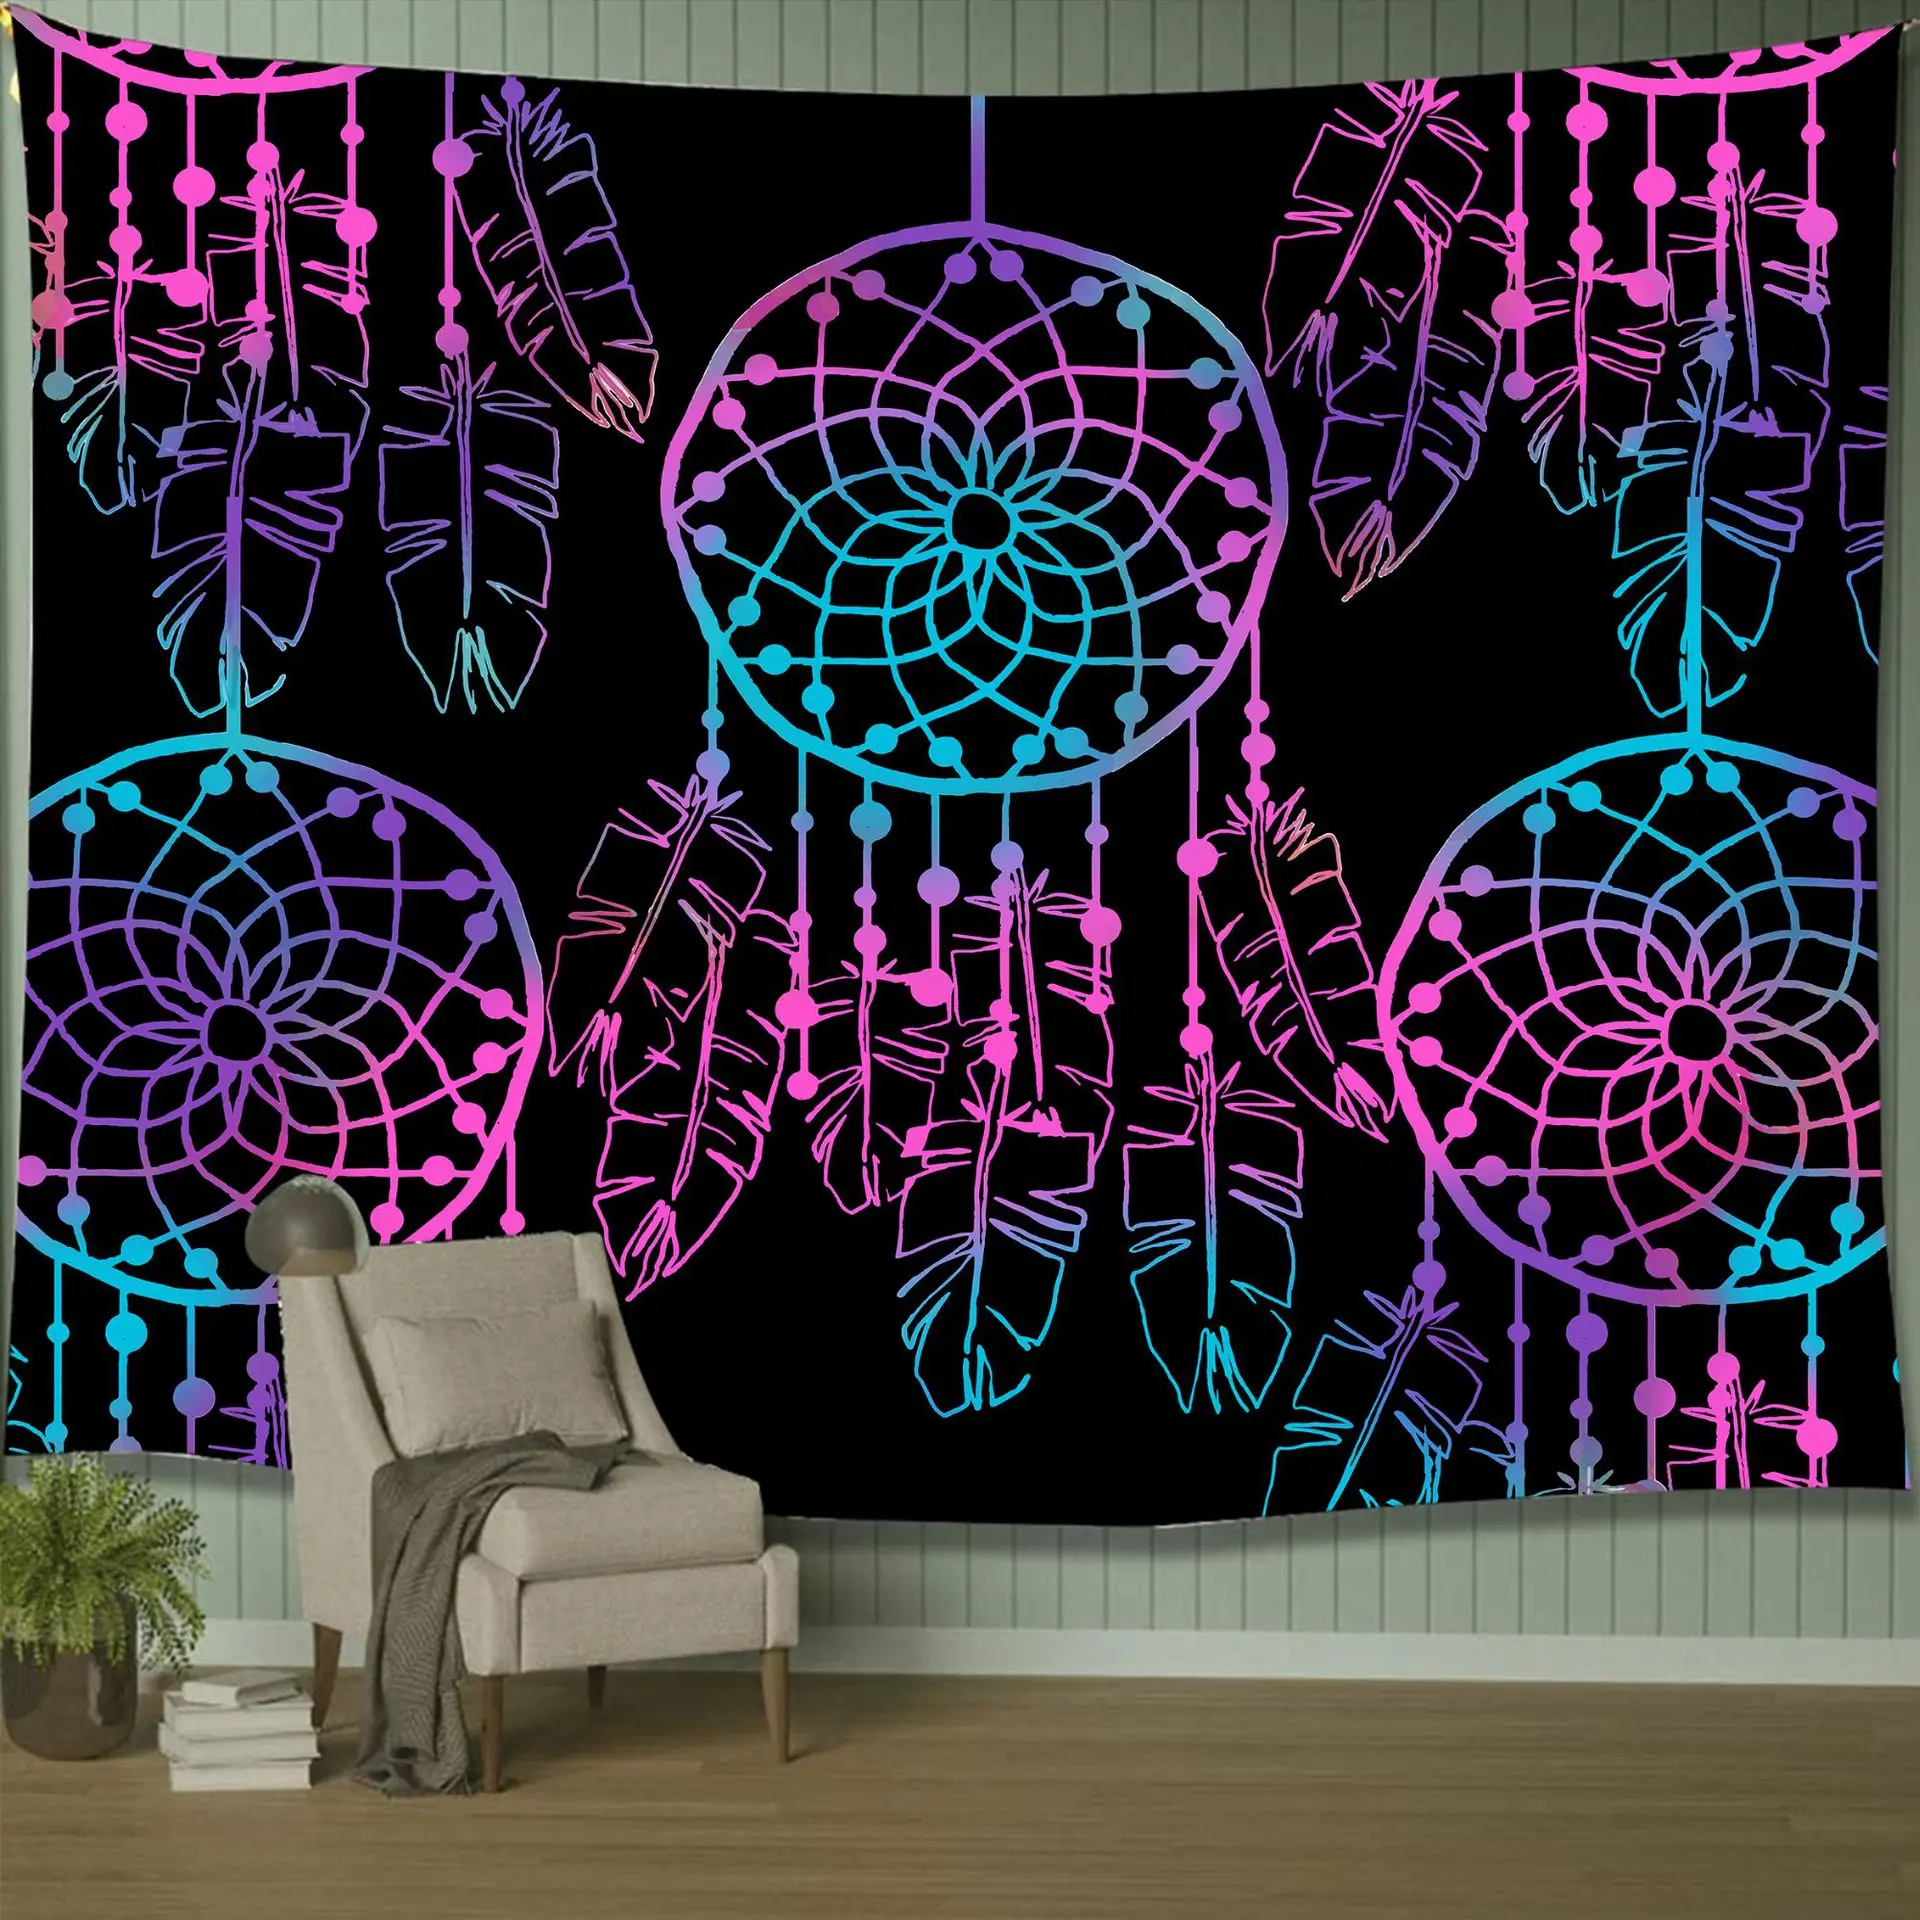 Tapestry Dreamcatcher Tapestry Wall Hanging Feather Tapestry for Bedroom Living Room Cloth Fabric Towel Beach Towel Beach Sheet Dekotuch Wand Hanging 150x130cm 